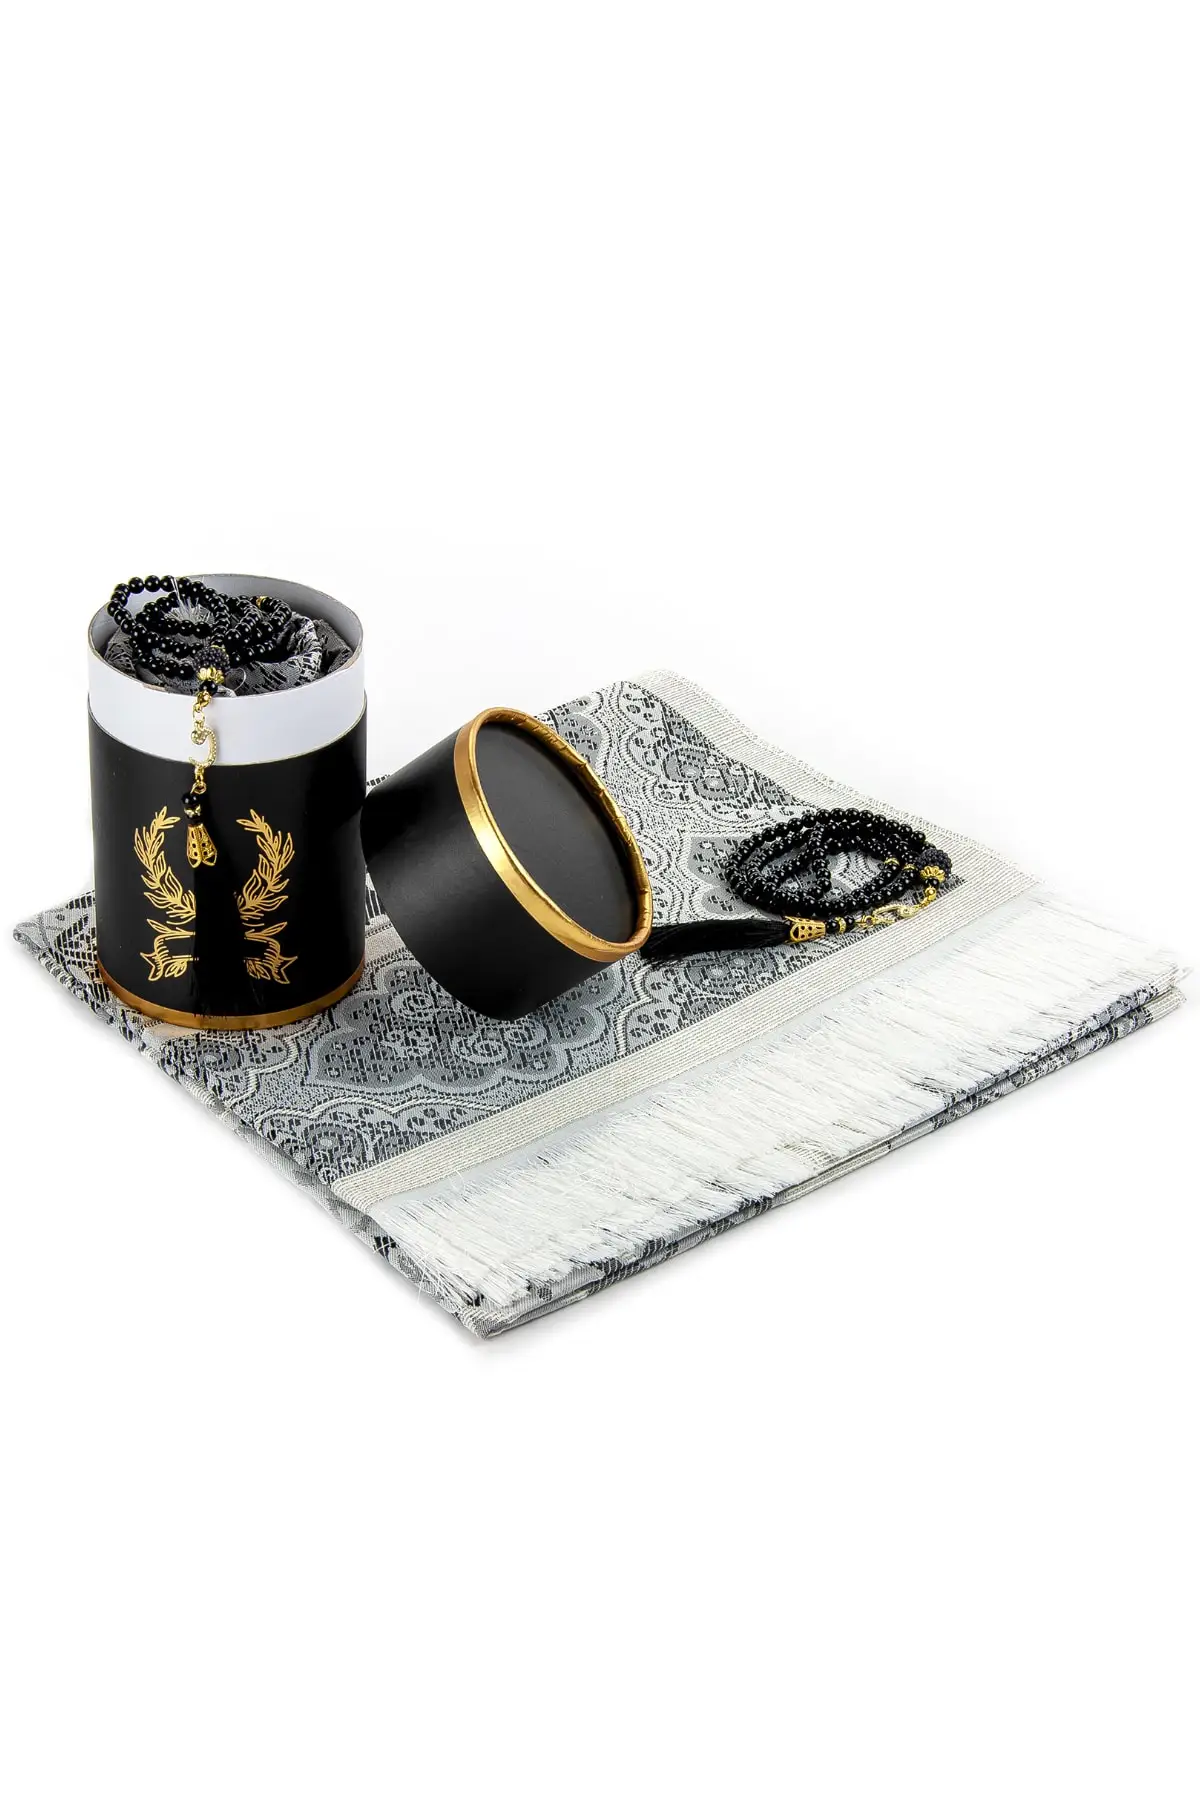 

Black Color Multi-Color Seced Carpet & Rug Mop Home Furniture With Custom Cylinder Box Set With Seccade And Pearl Rosary